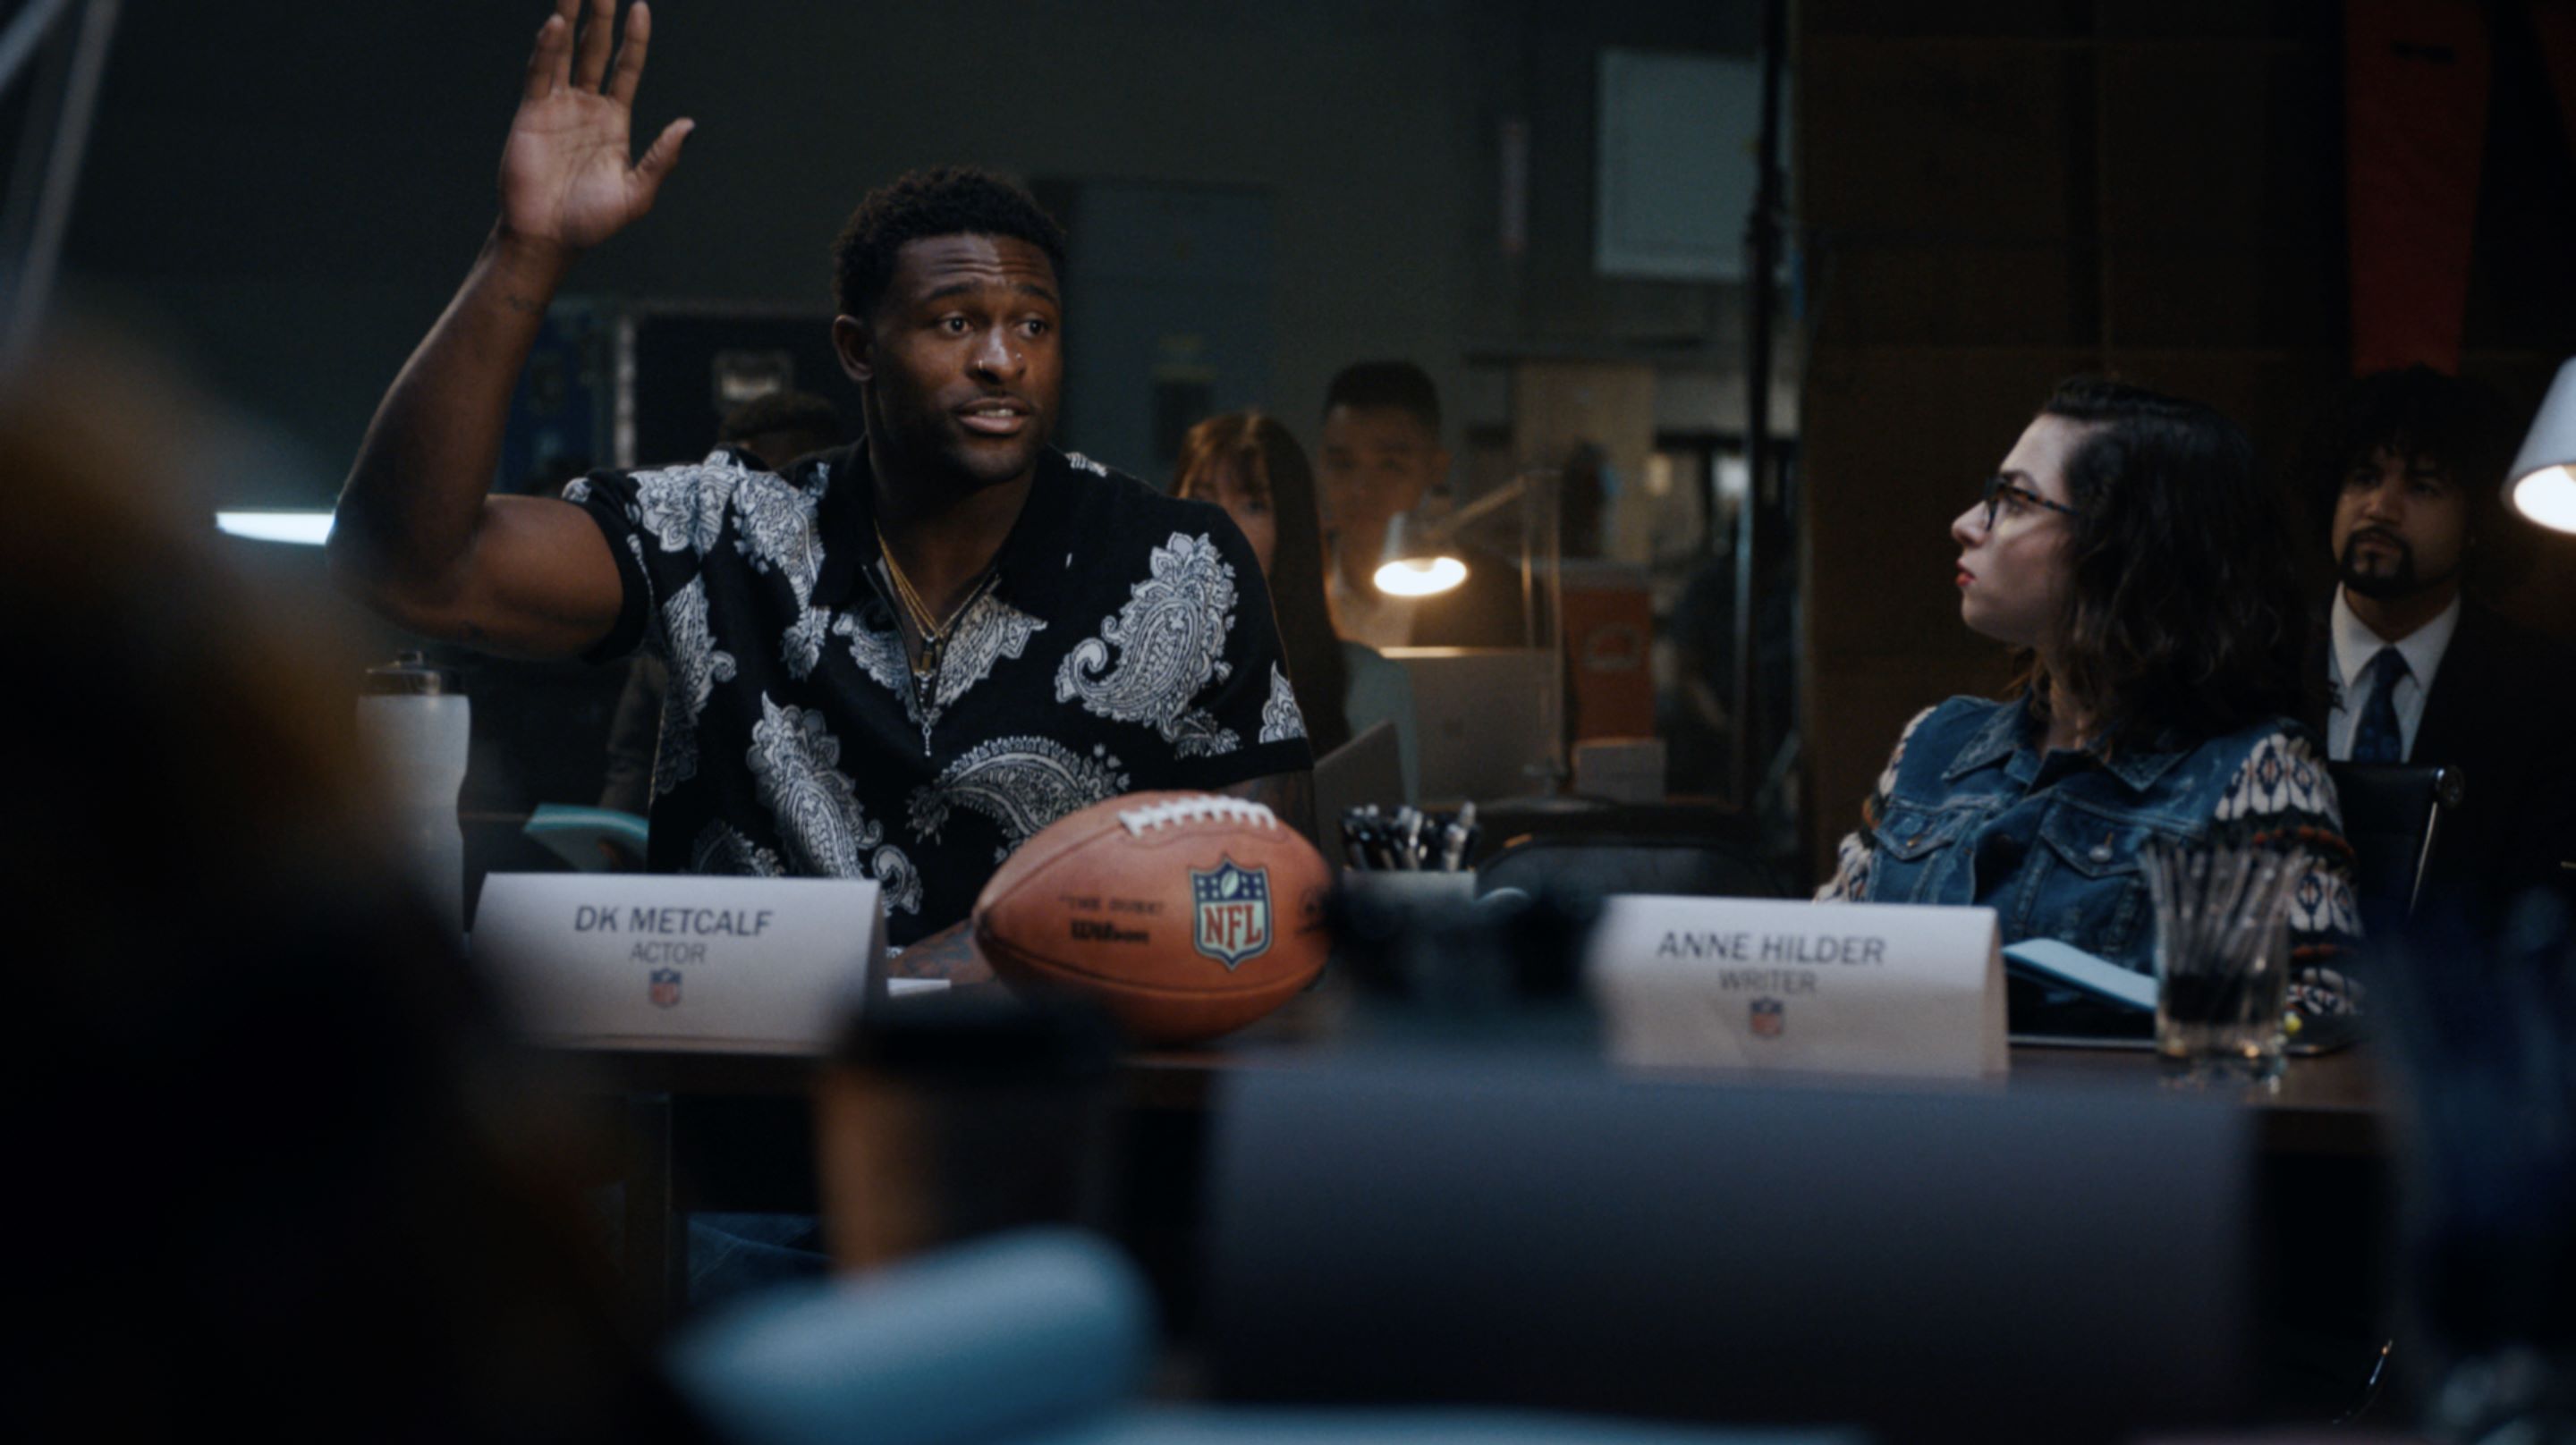 The Strategy Behind Louis Vuitton's Viral Football Campaign